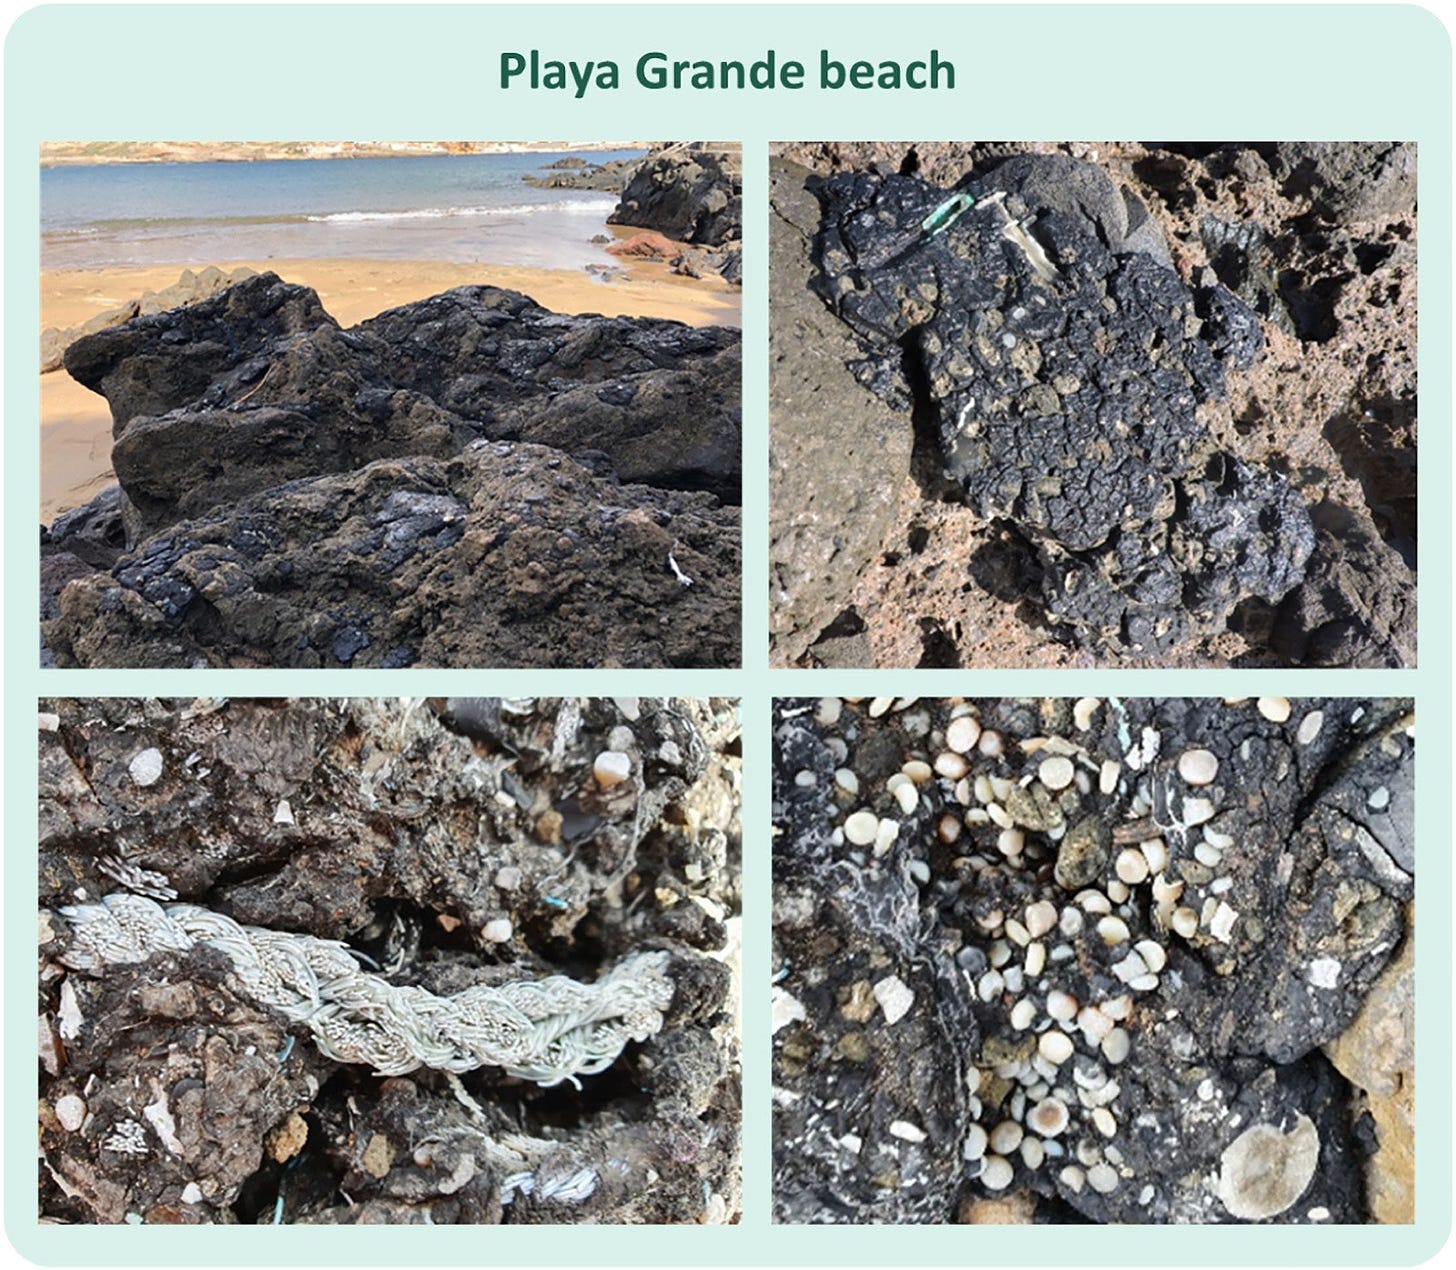 A grid of four images from Playa Grande beach in Tenerife, the Canary Islands, showing rocks covered with blobs of black tar embedded with plastic pellets, one also with a skein of fraying plastic rope.